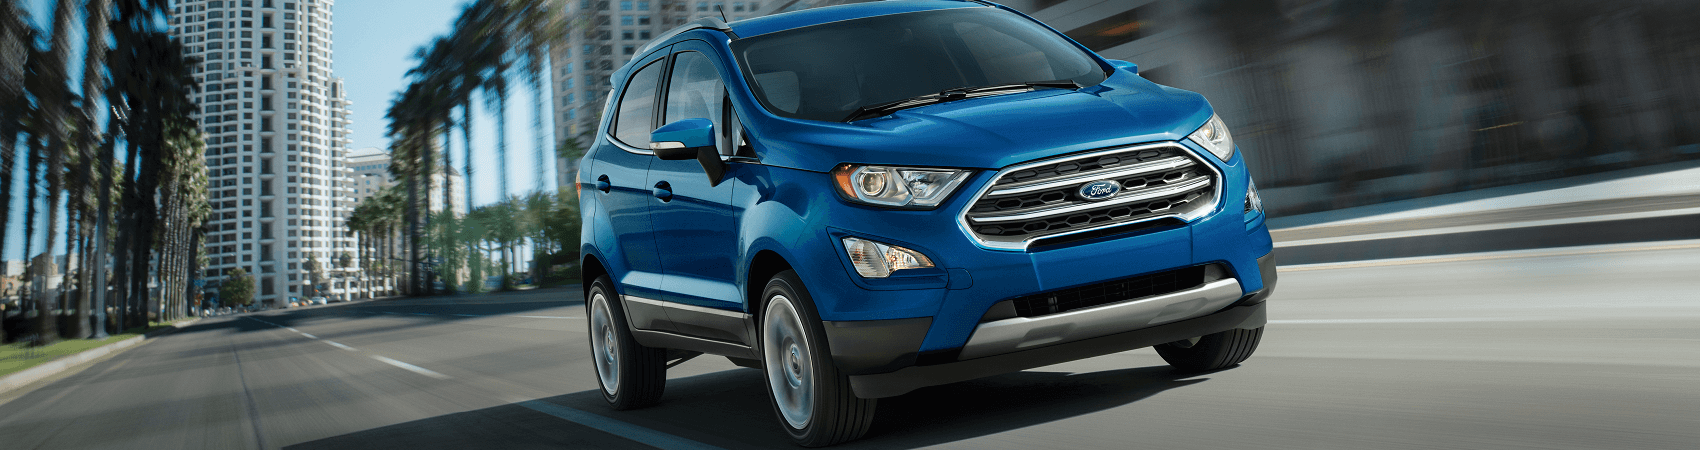 Ford EcoSport driving on city highway